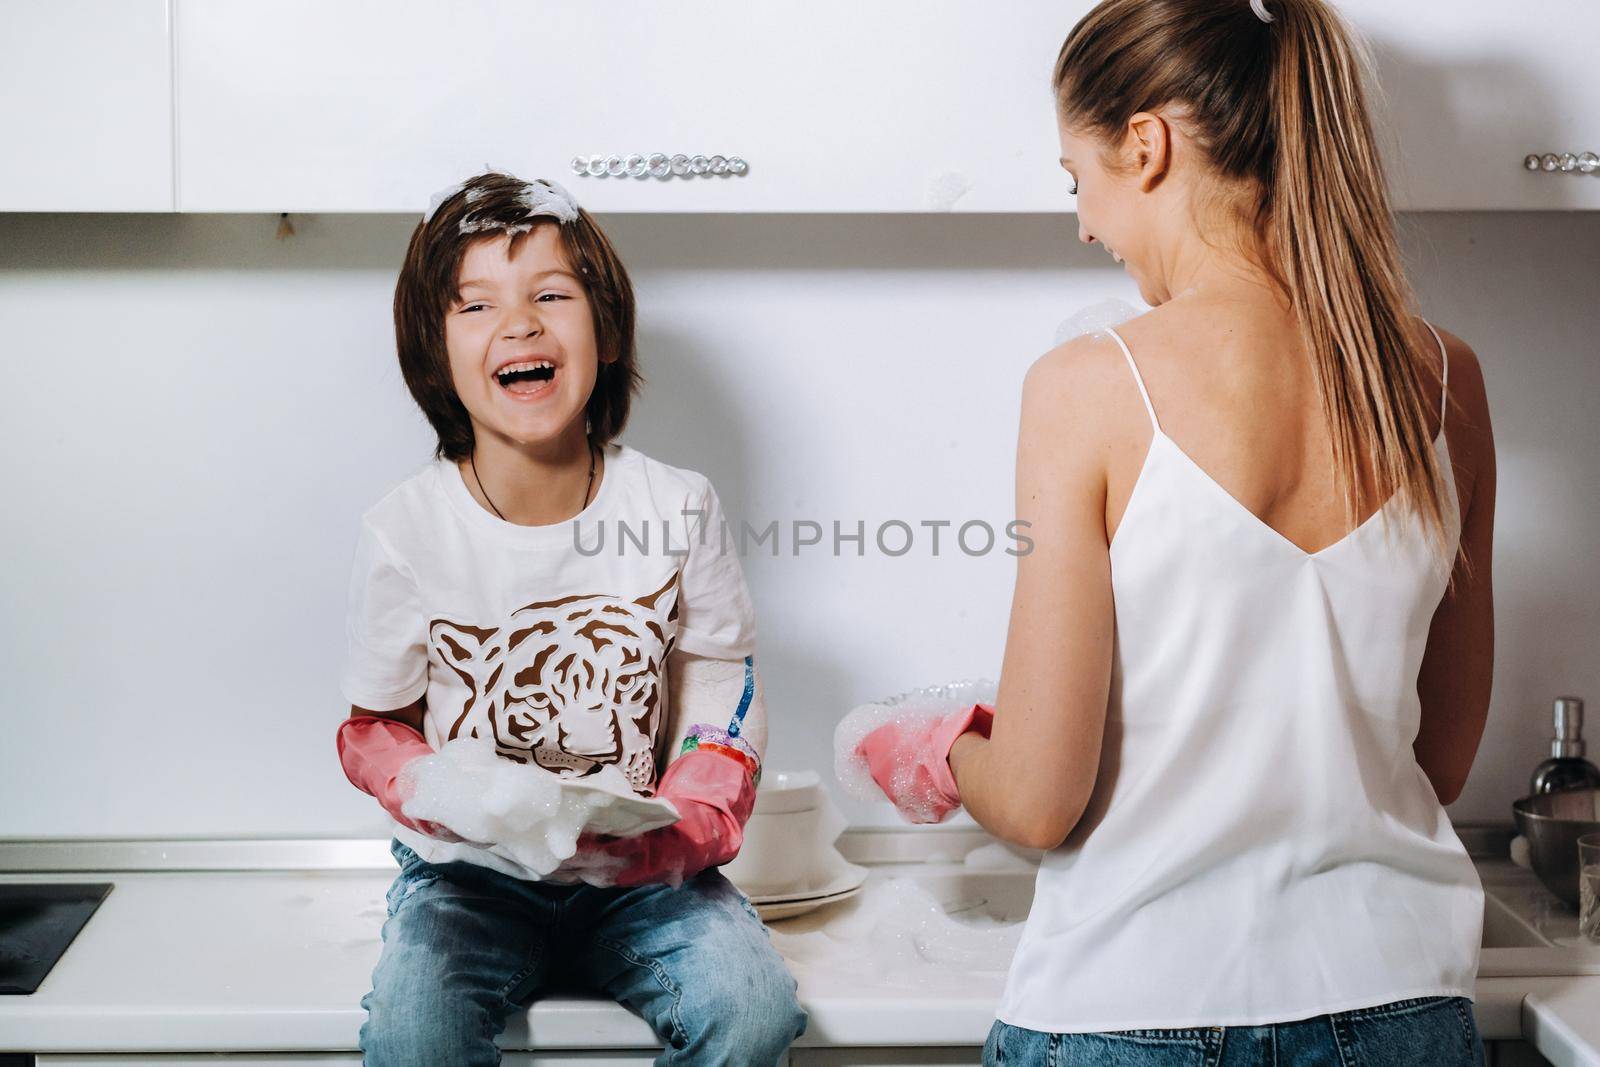 housewife mom in pink gloves washes dishes with her son by hand in the sink with detergent. A girl in white and a child with a cast cleans the house and washes dishes in homemade pink gloves.A child with a cast washes dishes and smiles by Lobachad